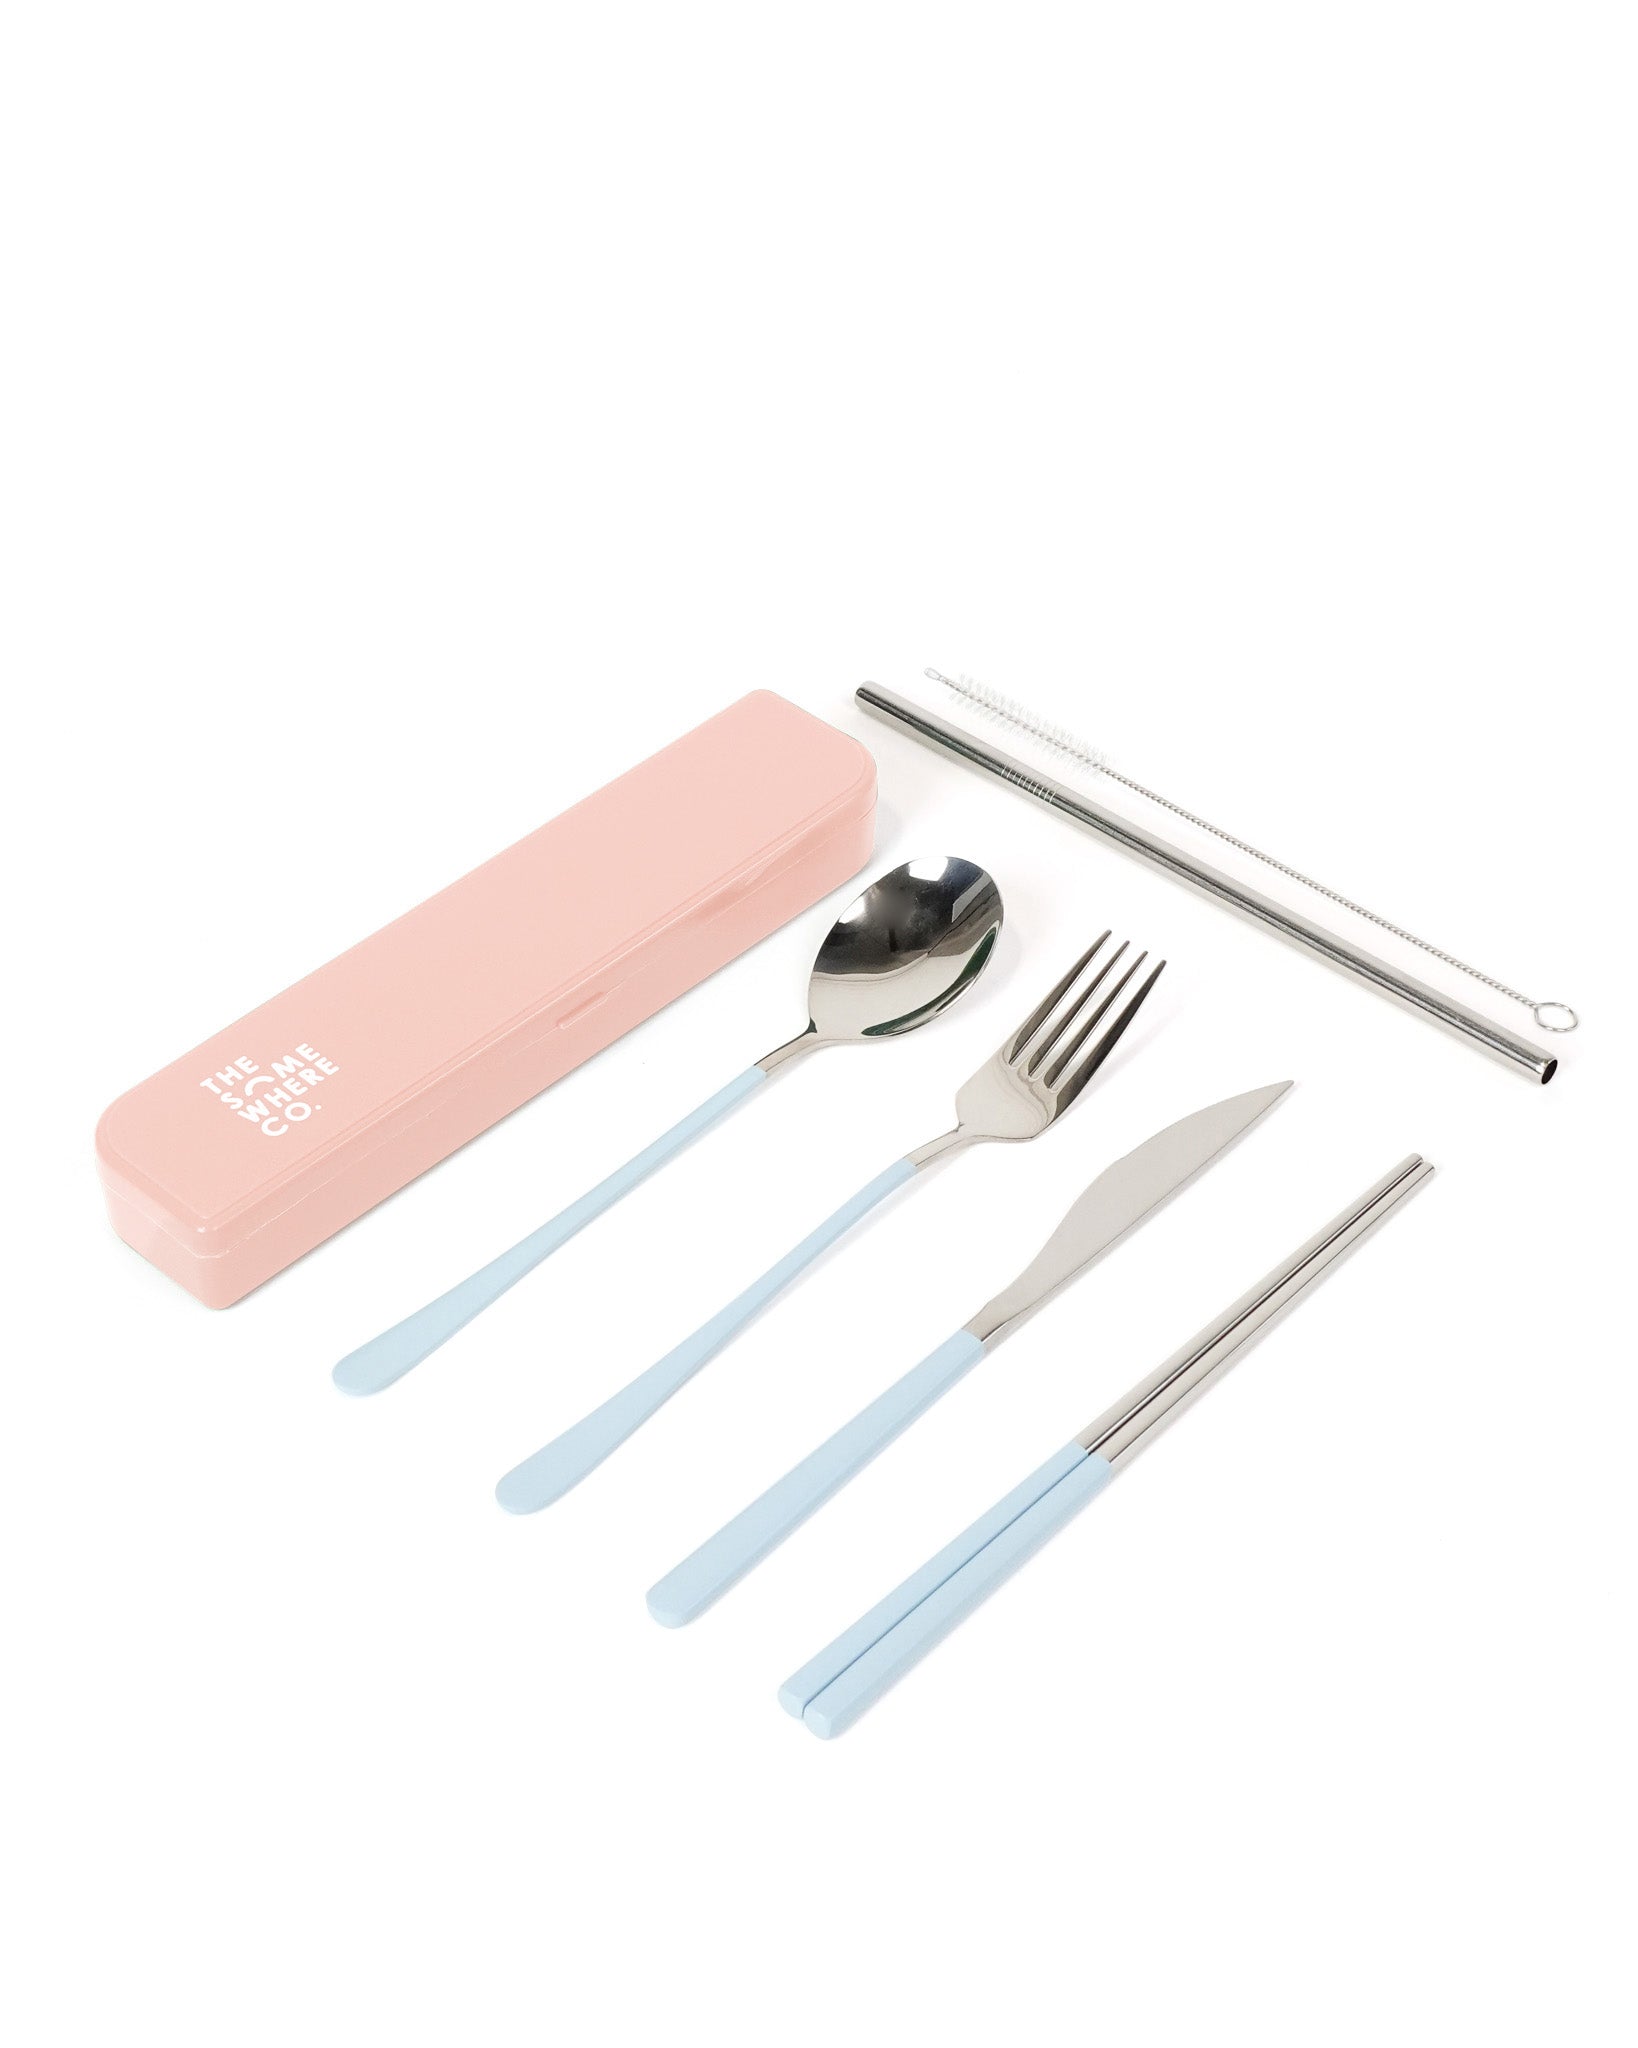 Cutlery Kit - Silver with Powder Blue Handle (PRE-ORDER)